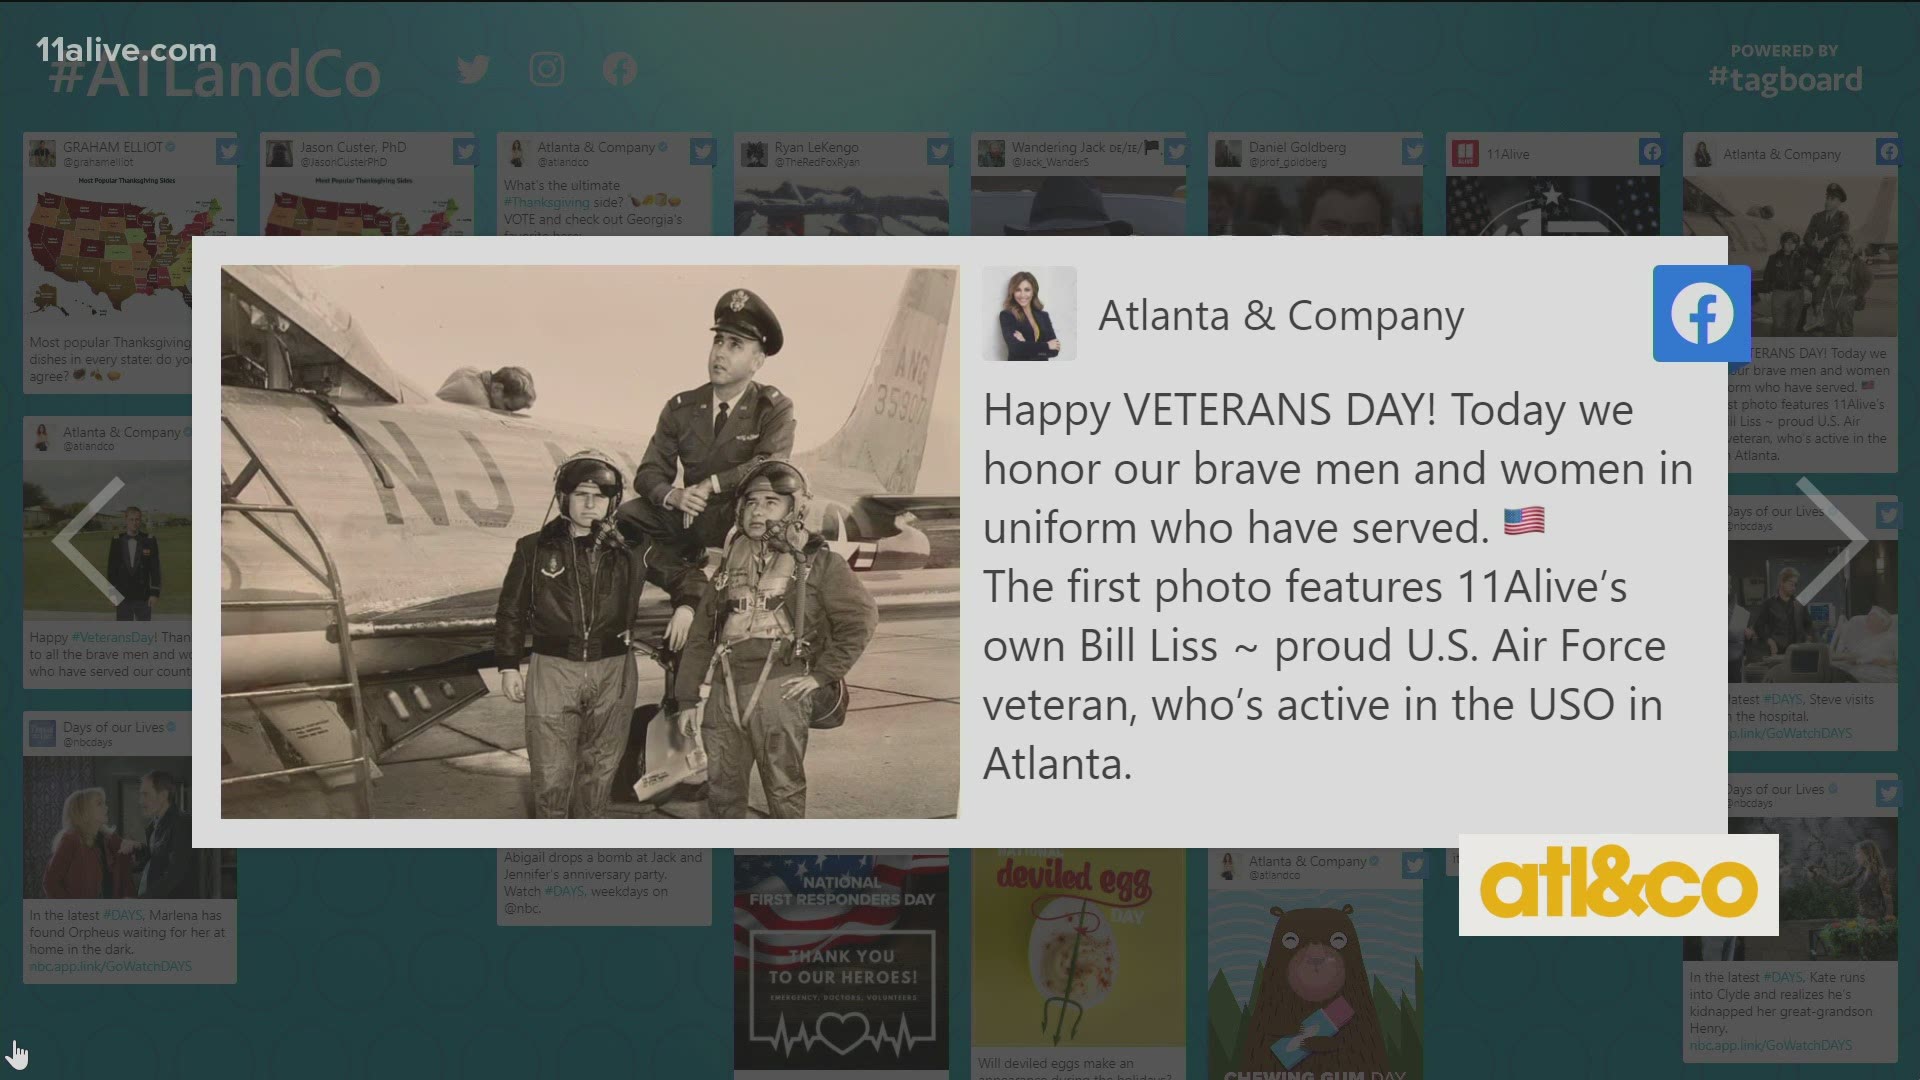 Happy Veterans Day to all who have bravely served, including 11Alive's own Bill Liss -- Senior Source anchor, attorney, and proud Air Force vet active in the USO.